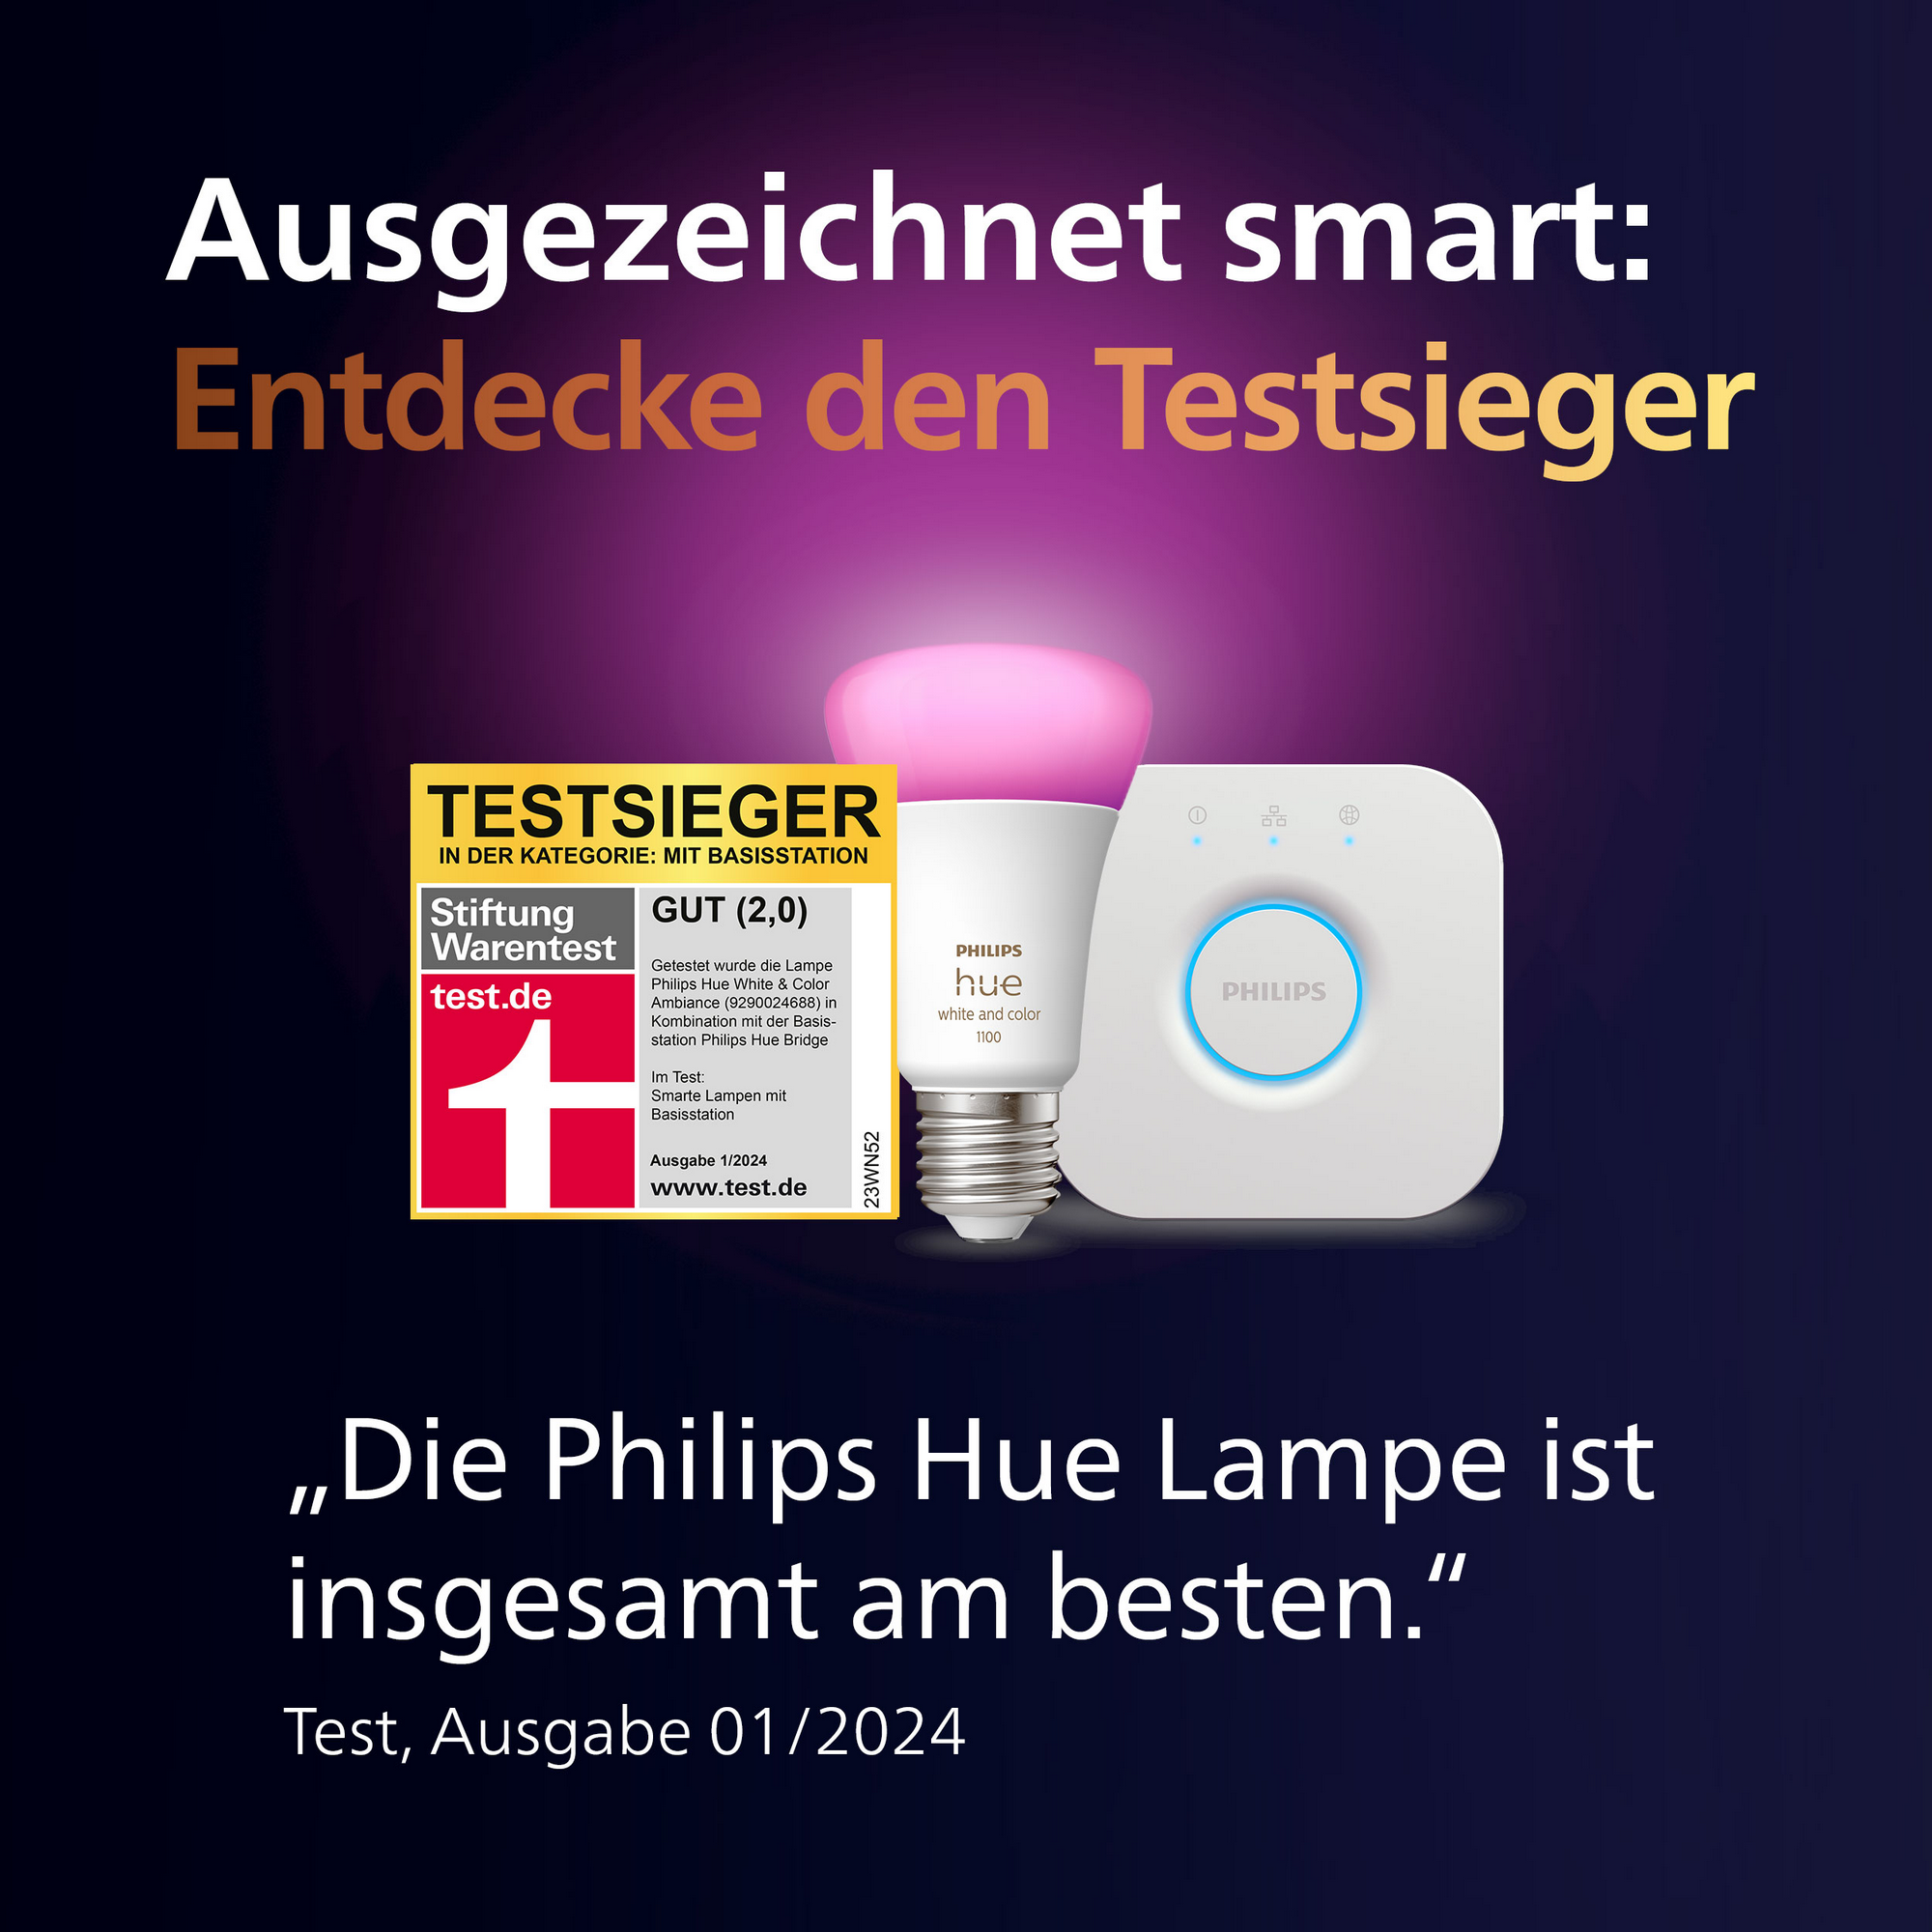 LED-Lampe Starter-Set 'Hue White & Color Ambiance' inkl. 2 x E27 9 W, Dimmerschalter, Smart Plug + product picture